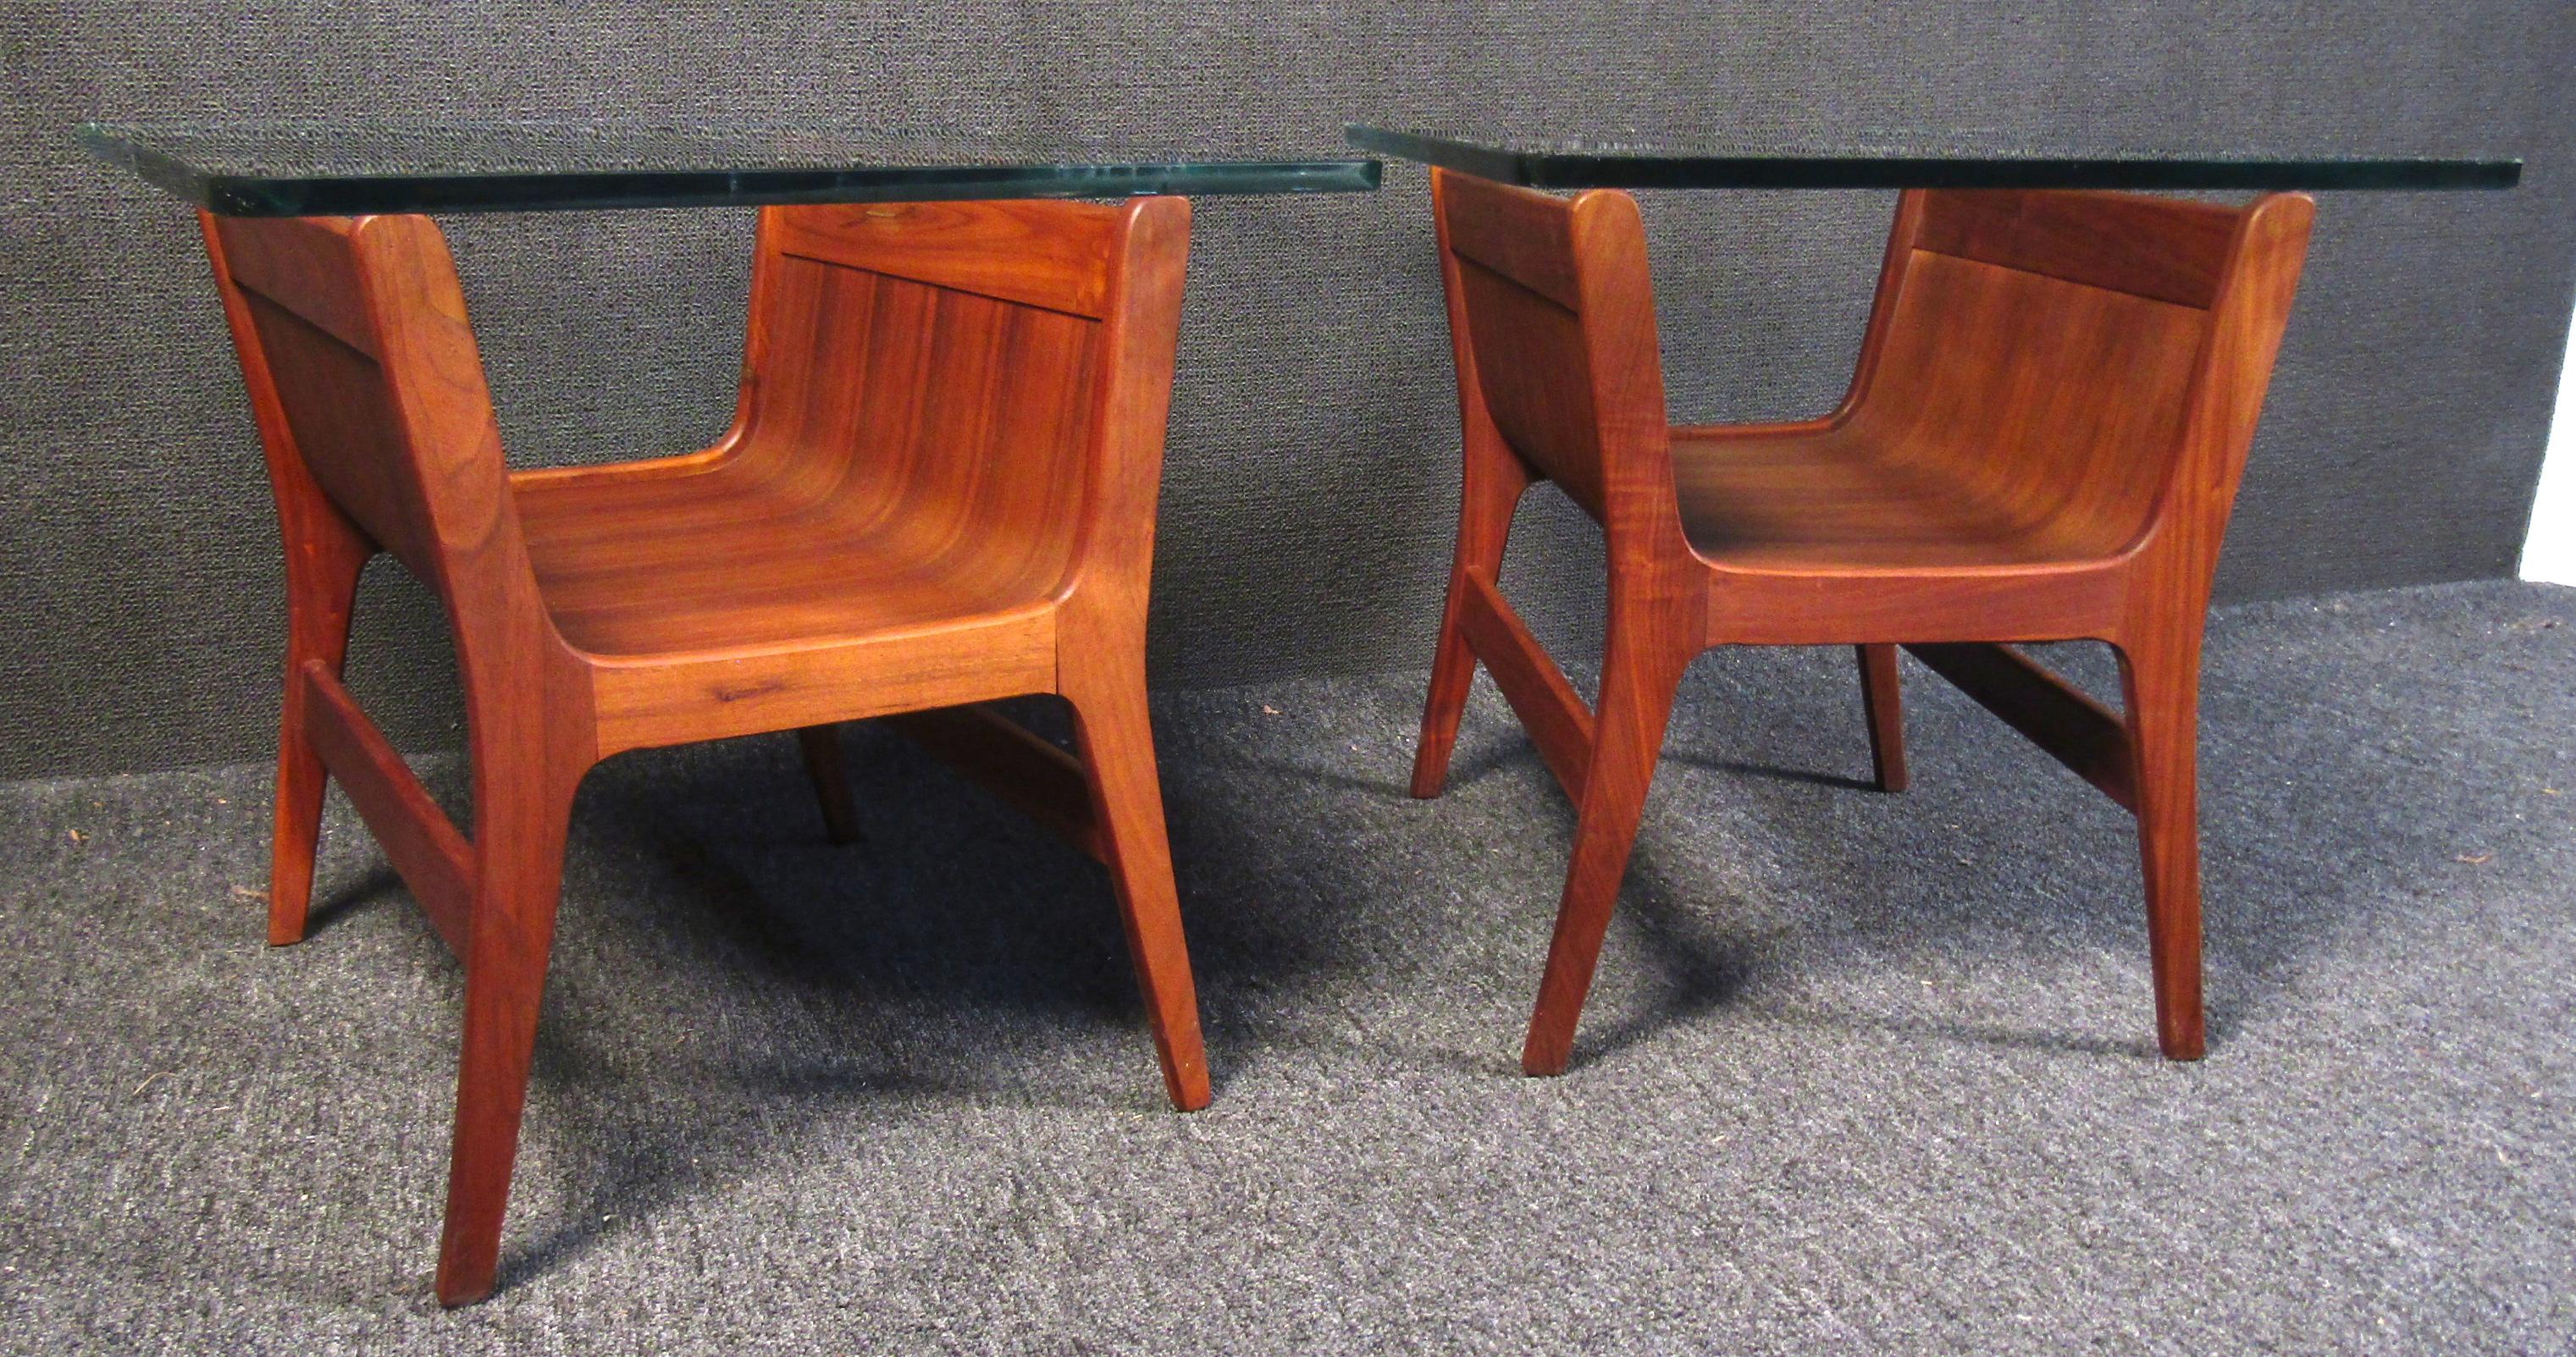 Beautiful Mid-Century Modern Sculptural Wood Side Tables with Glass Tops For Sale 1